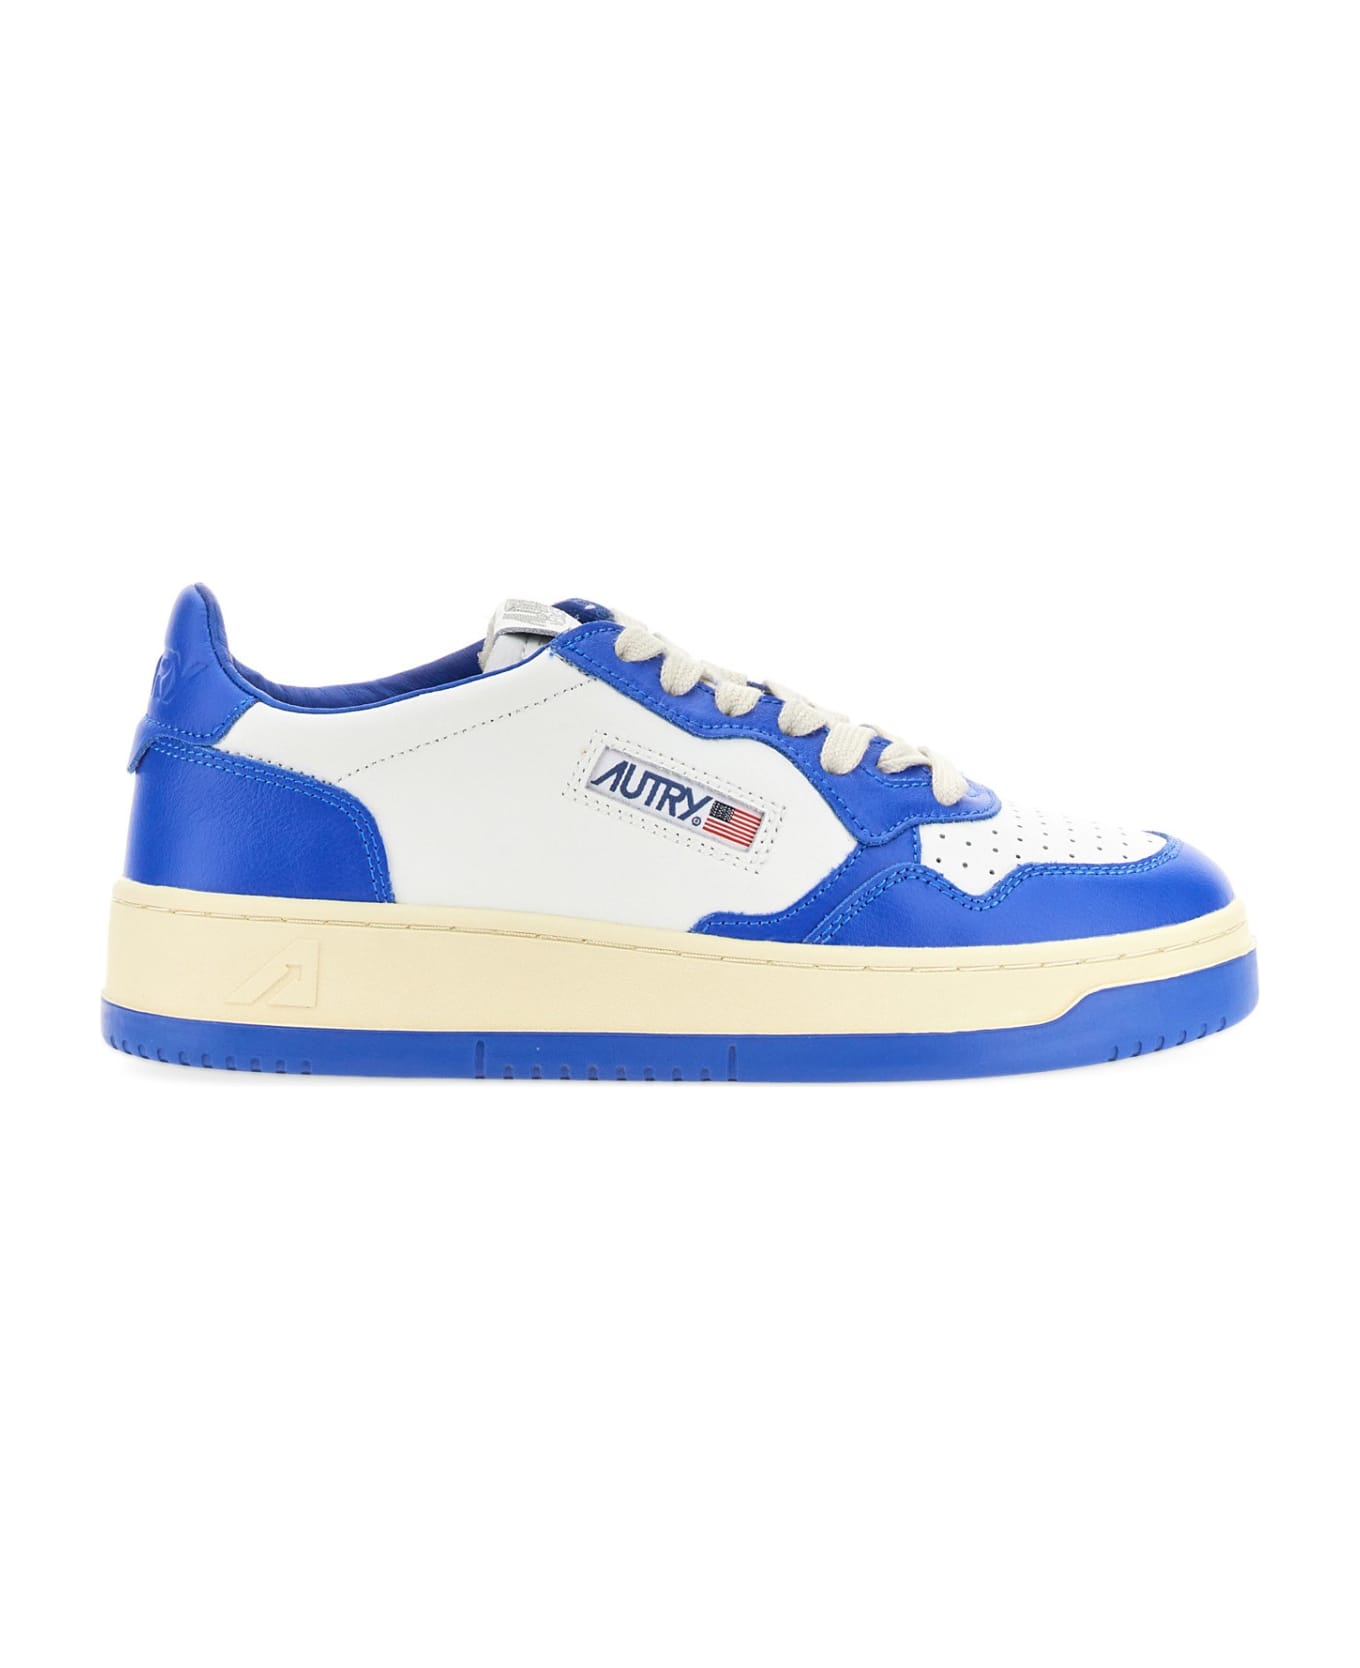 Autry Medalist Low Leather Sneakers - BLU スニーカー